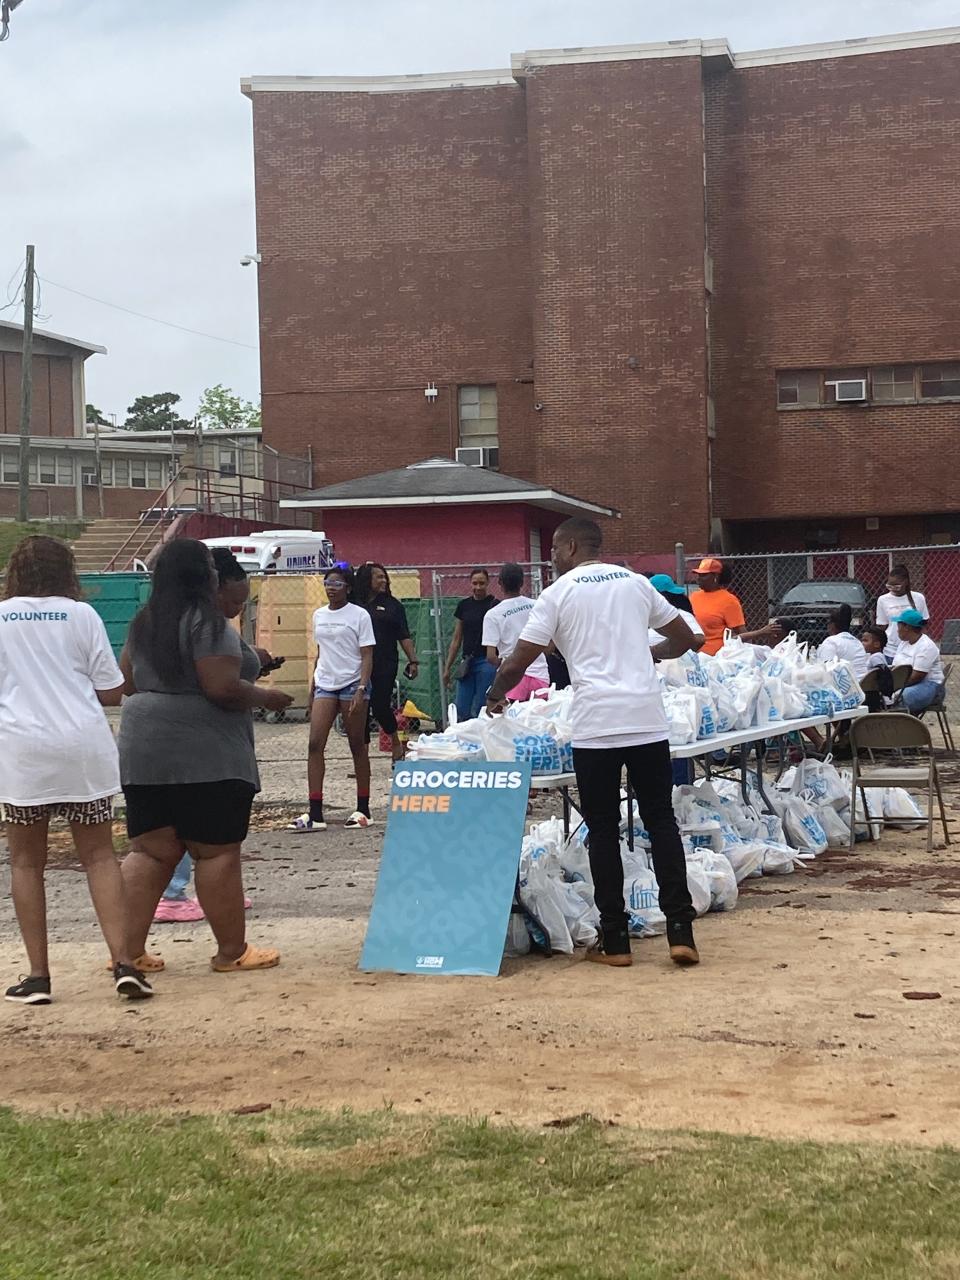 NFL player Daniel Thomas organized an event to give away groceries and hot meals outside his alma mater, Lee High School.